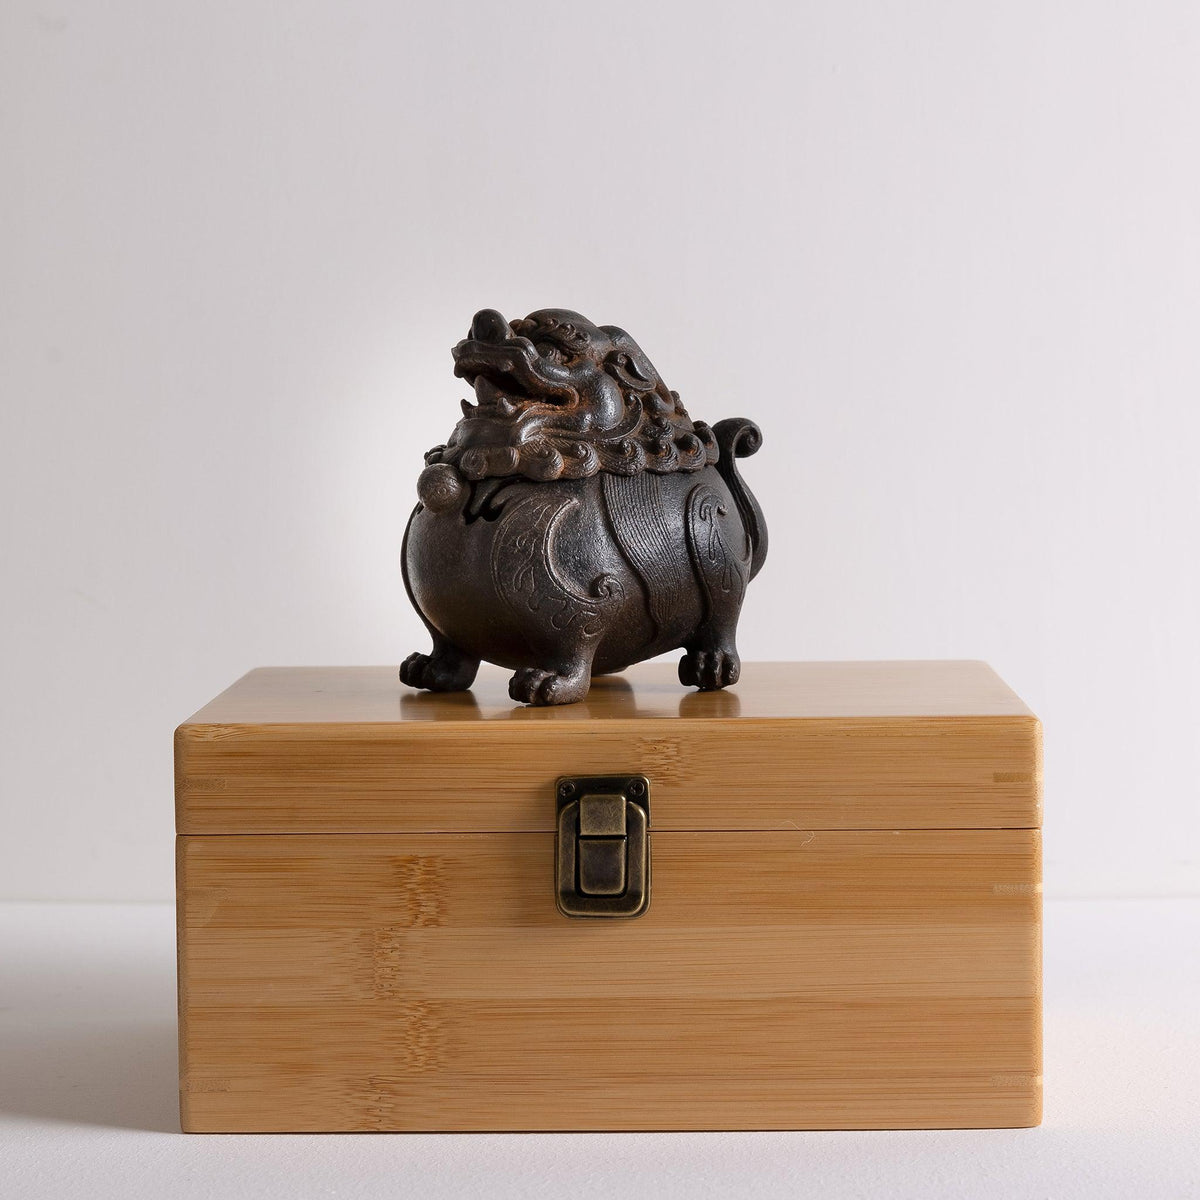 Cast iron suanni lion incense burner standing on bamboo box